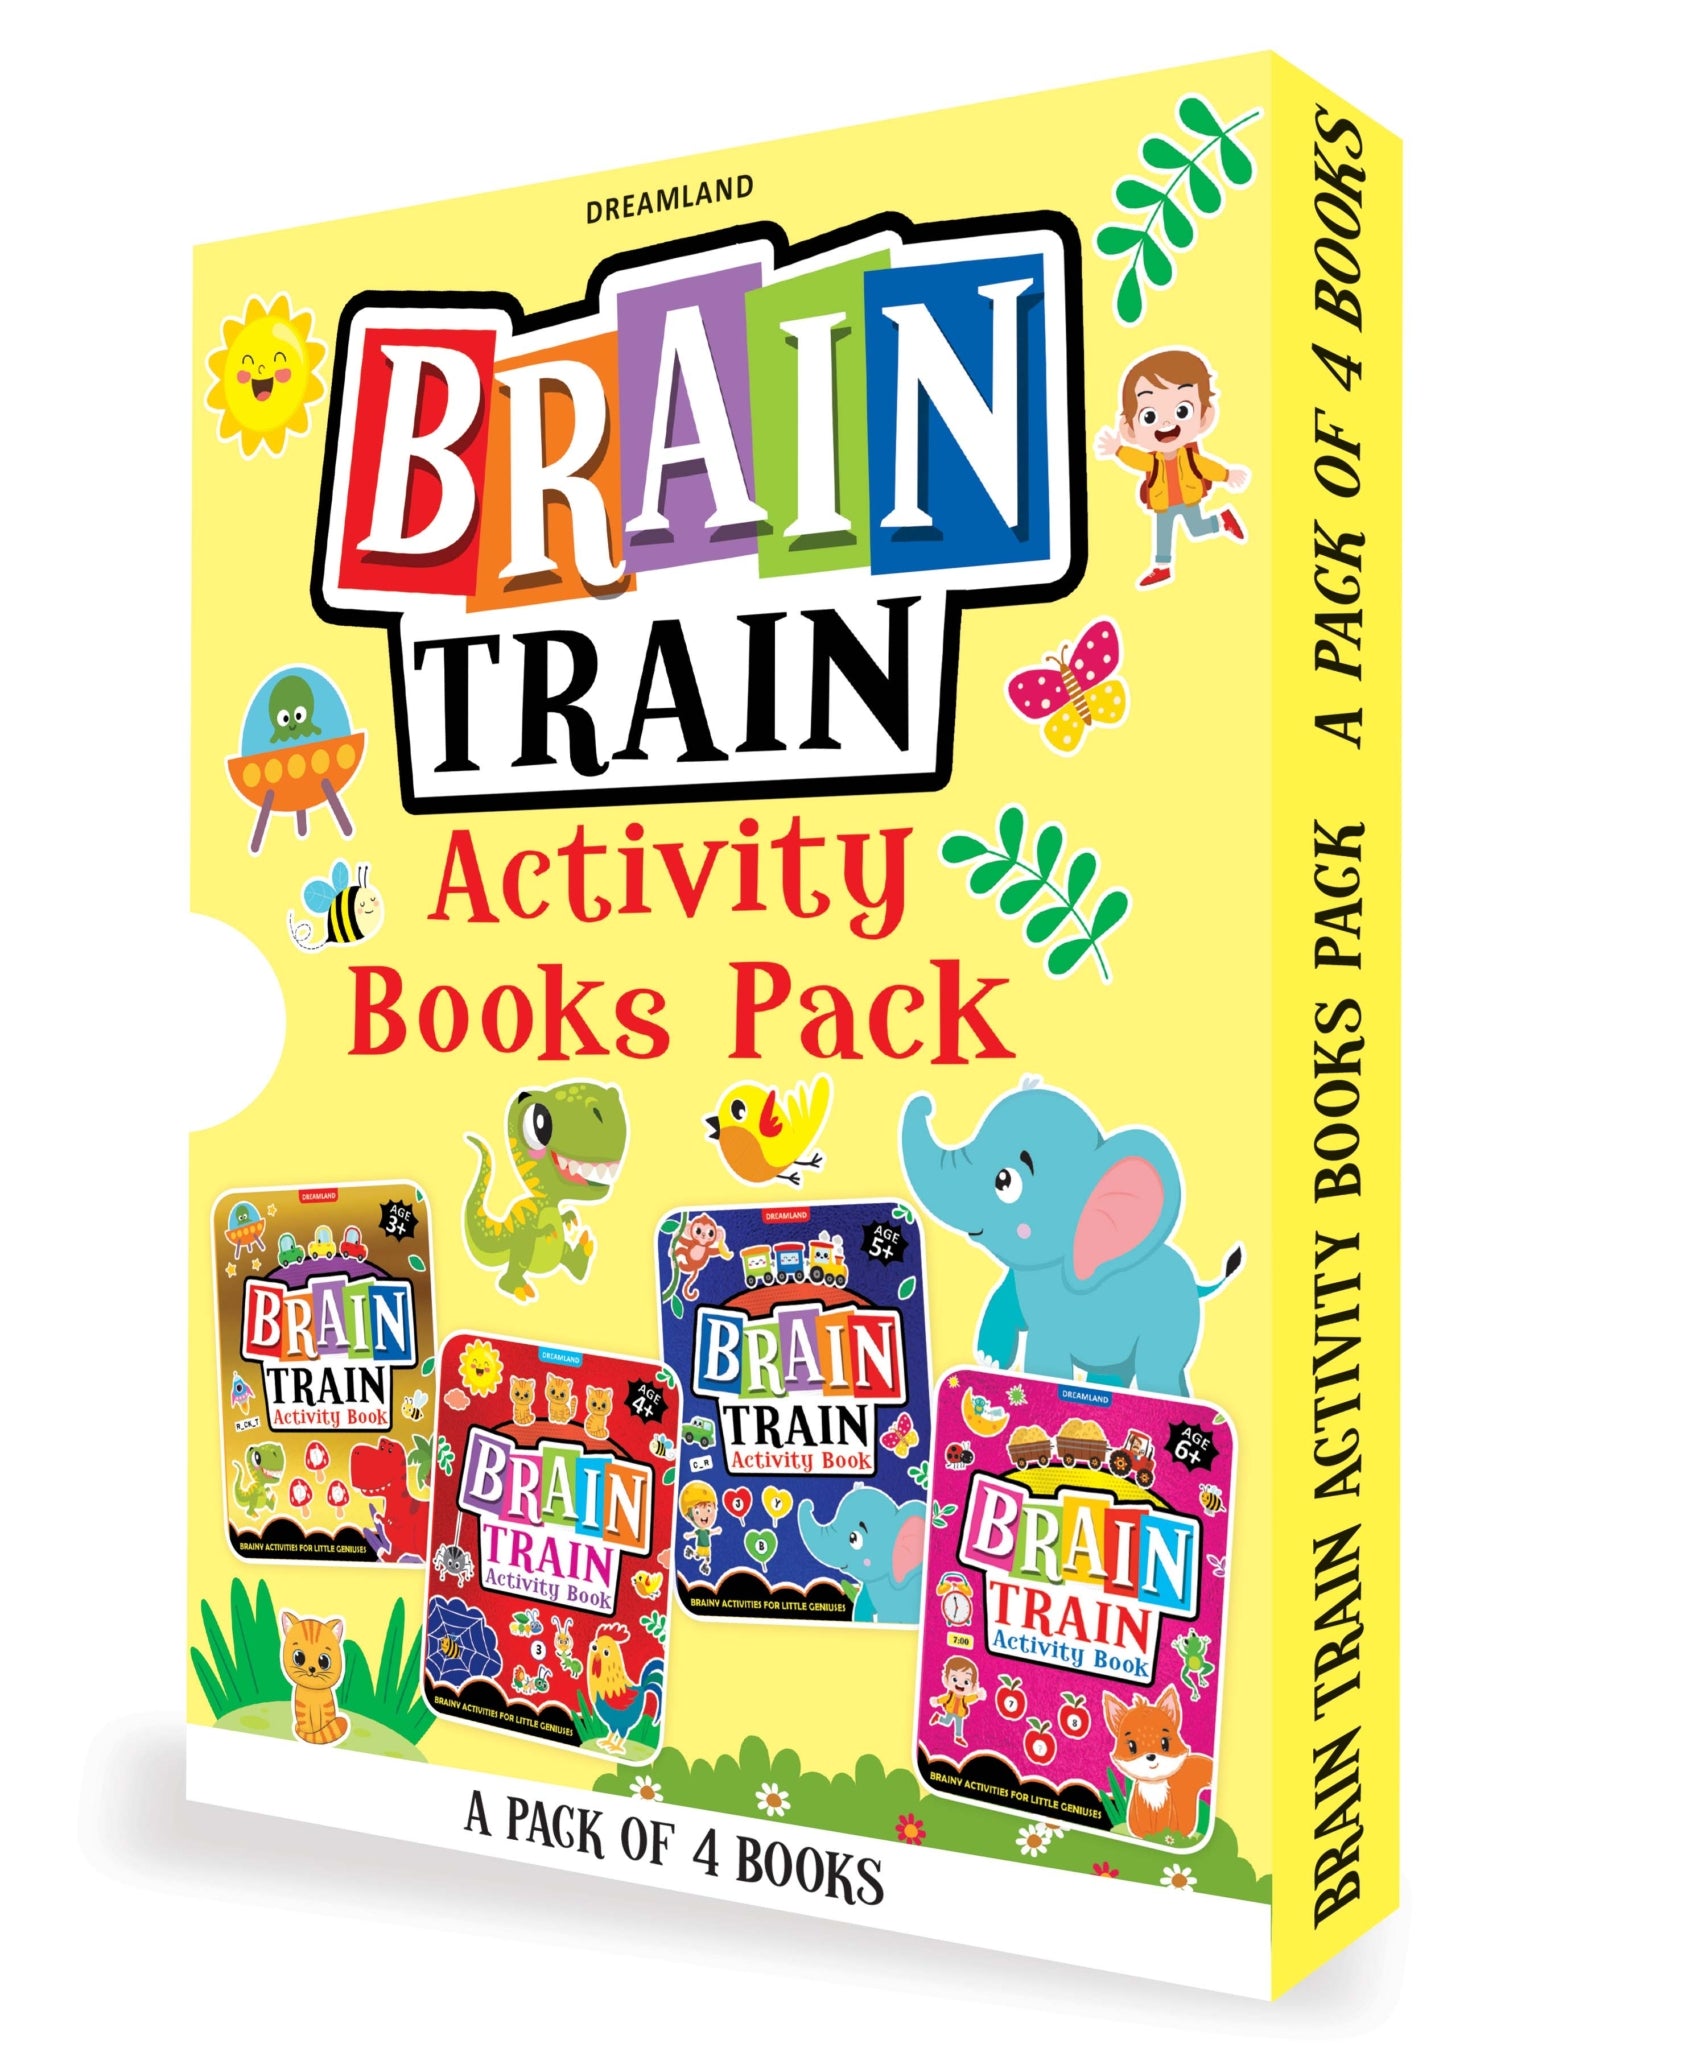 Brain Train Activity Books Pack- A Set of 4 Books - With Colouring Pages, Mazes, Puzzles and Word searches Activities